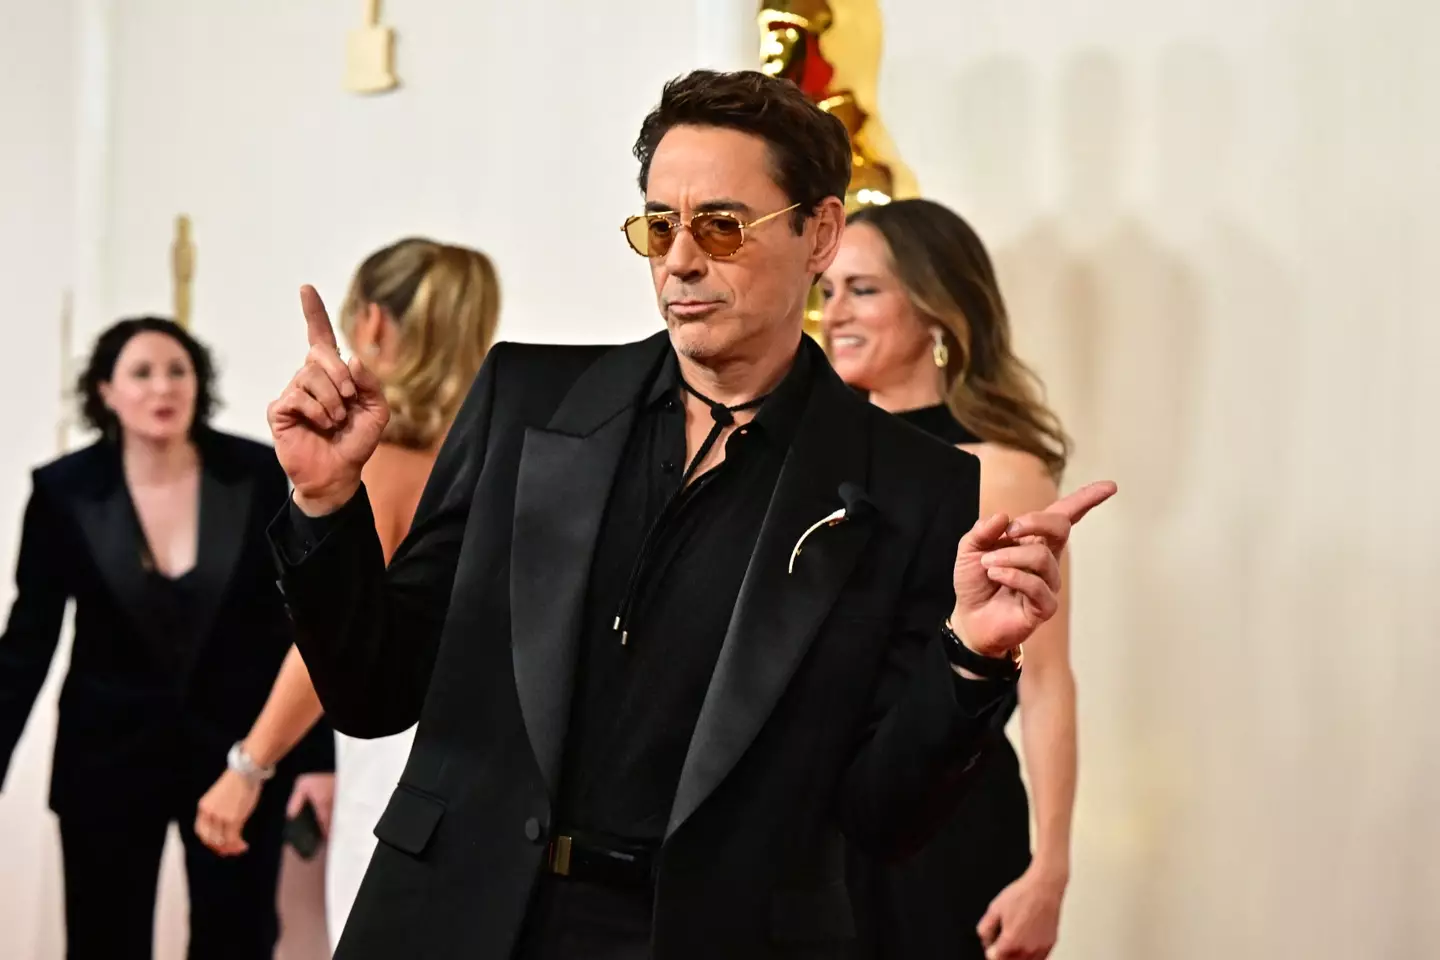 Robert Downey Jr. was able to beat out some very stiff competition to go home with his first ever Oscar.